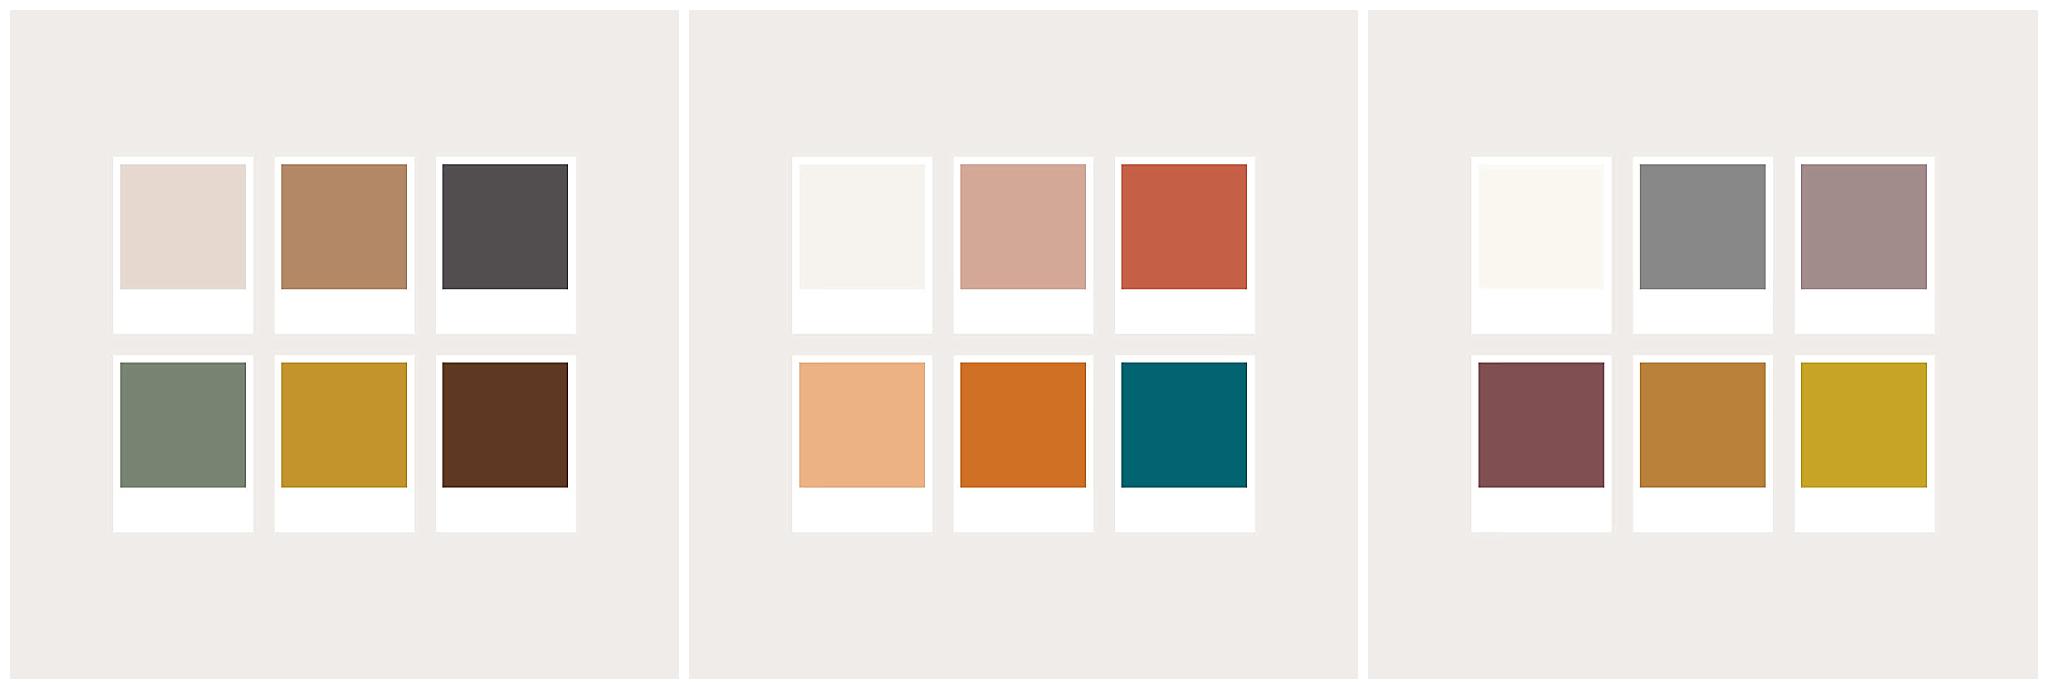 muted color schemes for family photos